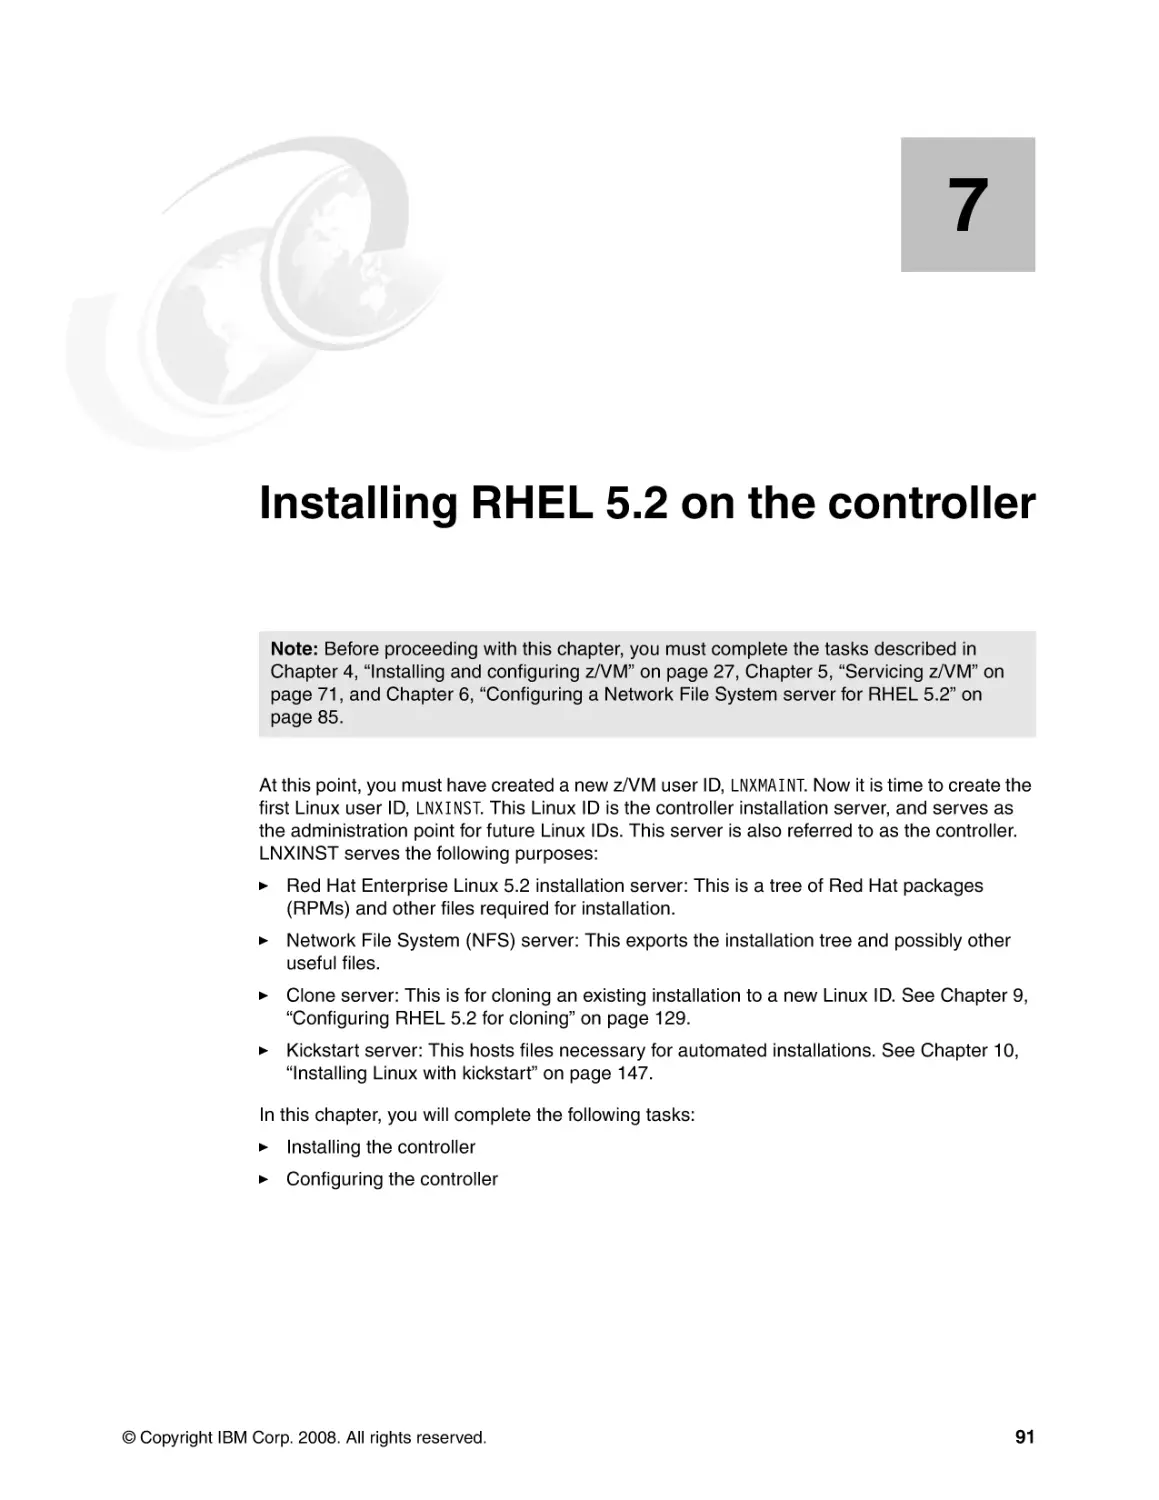 Chapter 7. Installing RHEL 5.2 on the controller